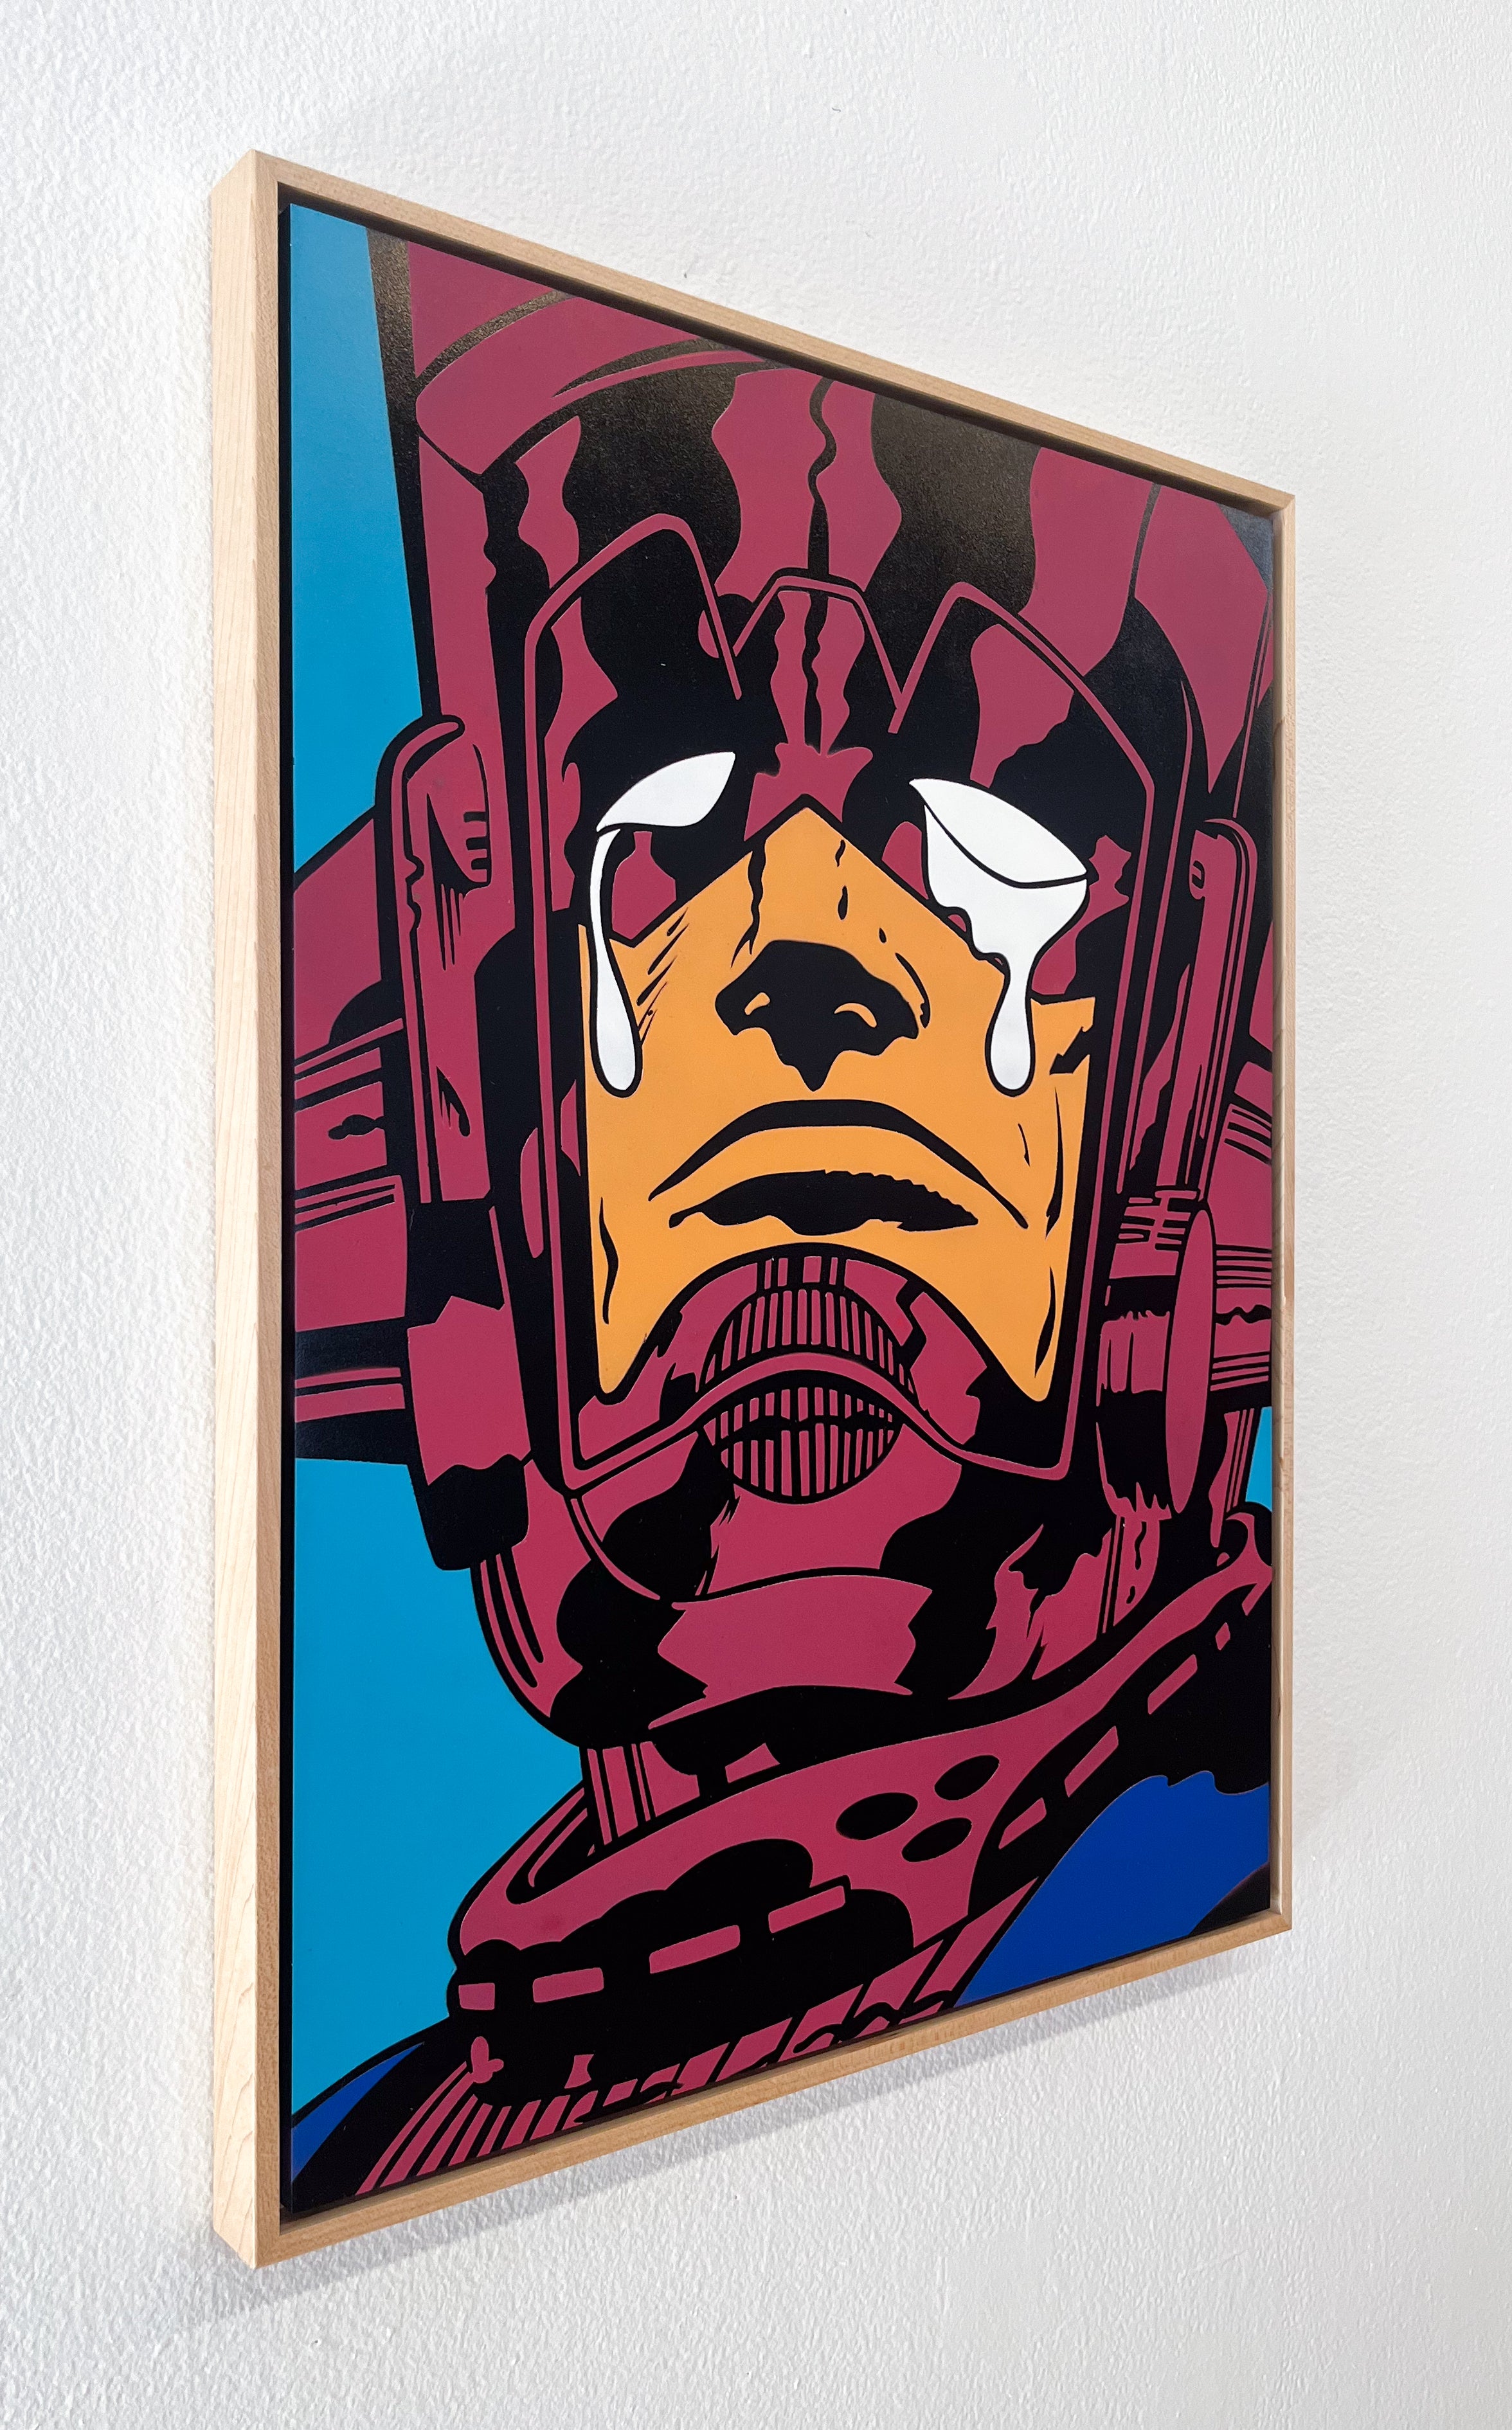 "Galactus' Anguish" by R6D4